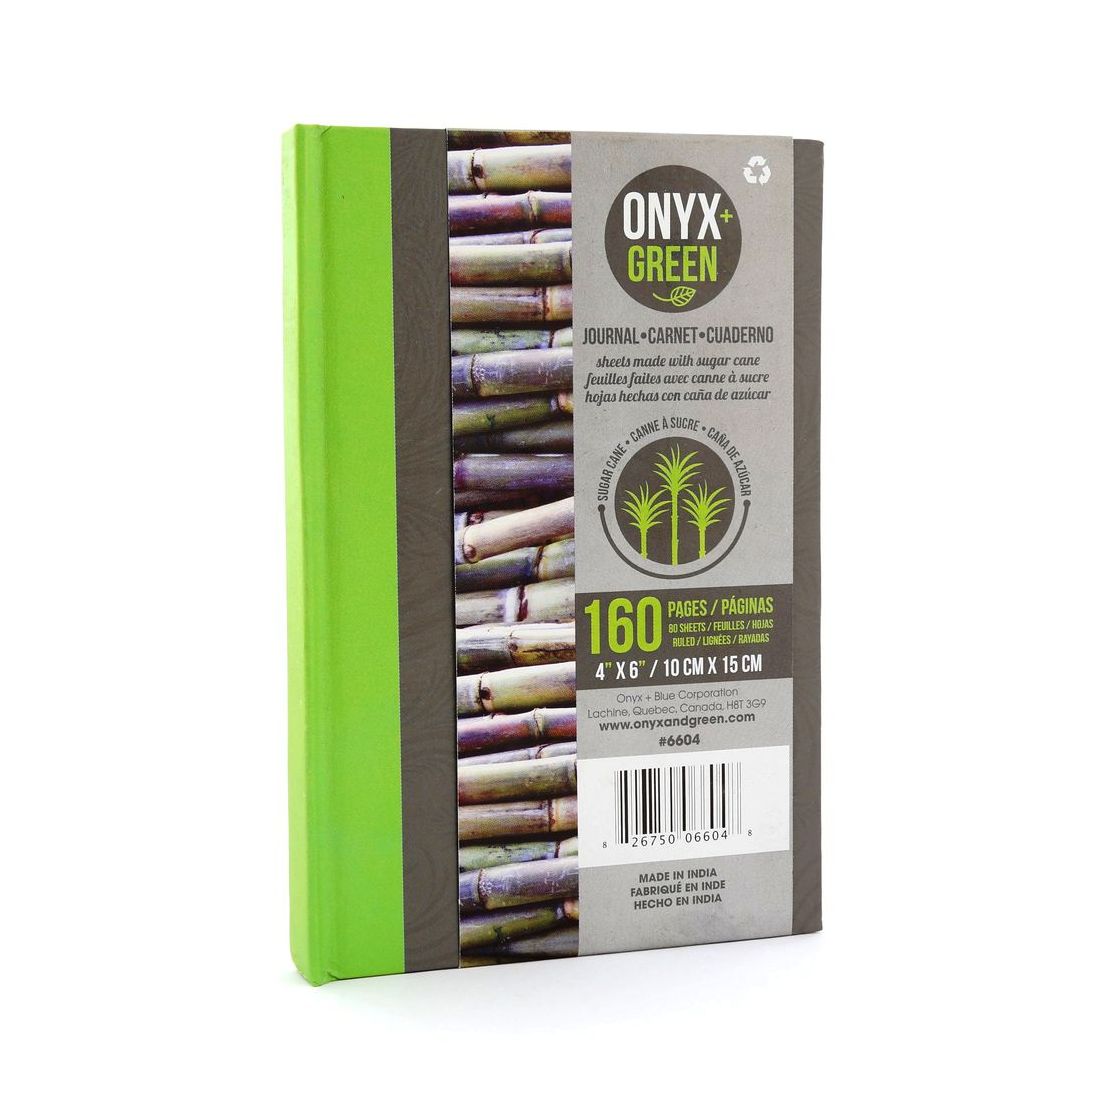 Onyx & Green Hard Cover Journal Notebook 80 Sheets of Sugar Cane Paper Ruled 4 x 6 Inches